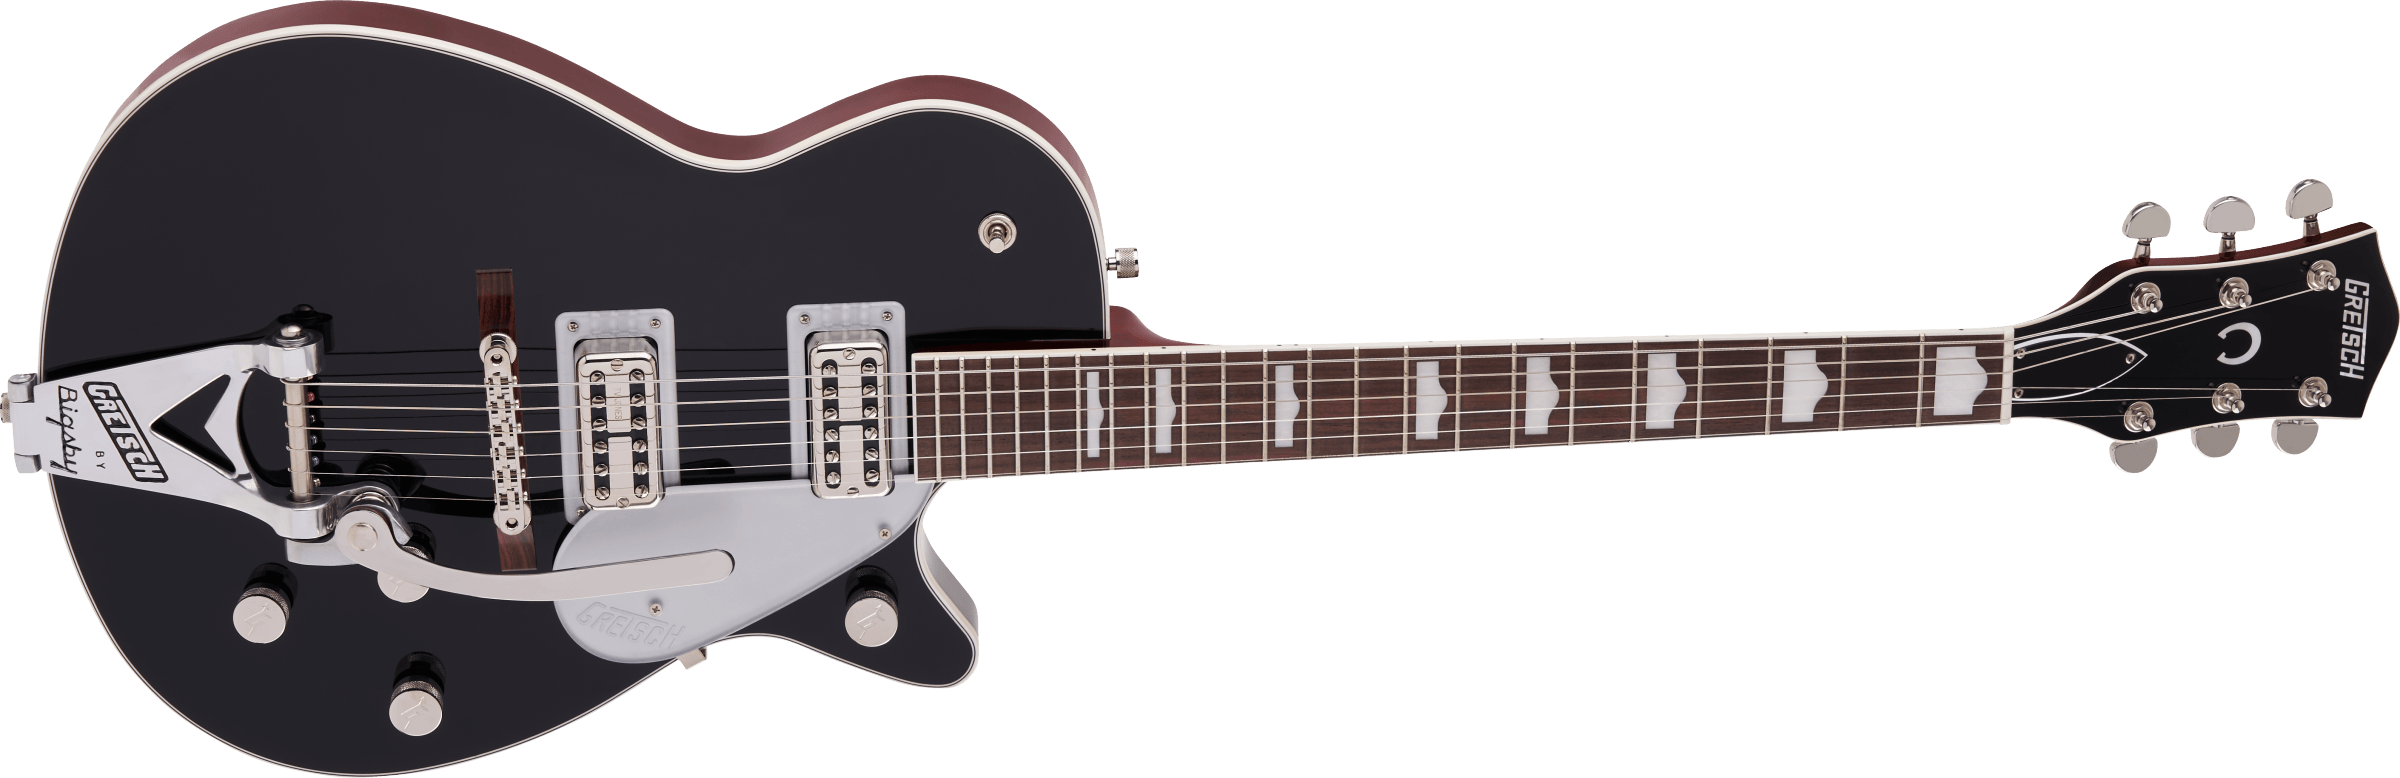 G6128T-89 Vintage Select '89 Duo Jet with Bigsby, Rosewood Fingerboard, Black追加画像